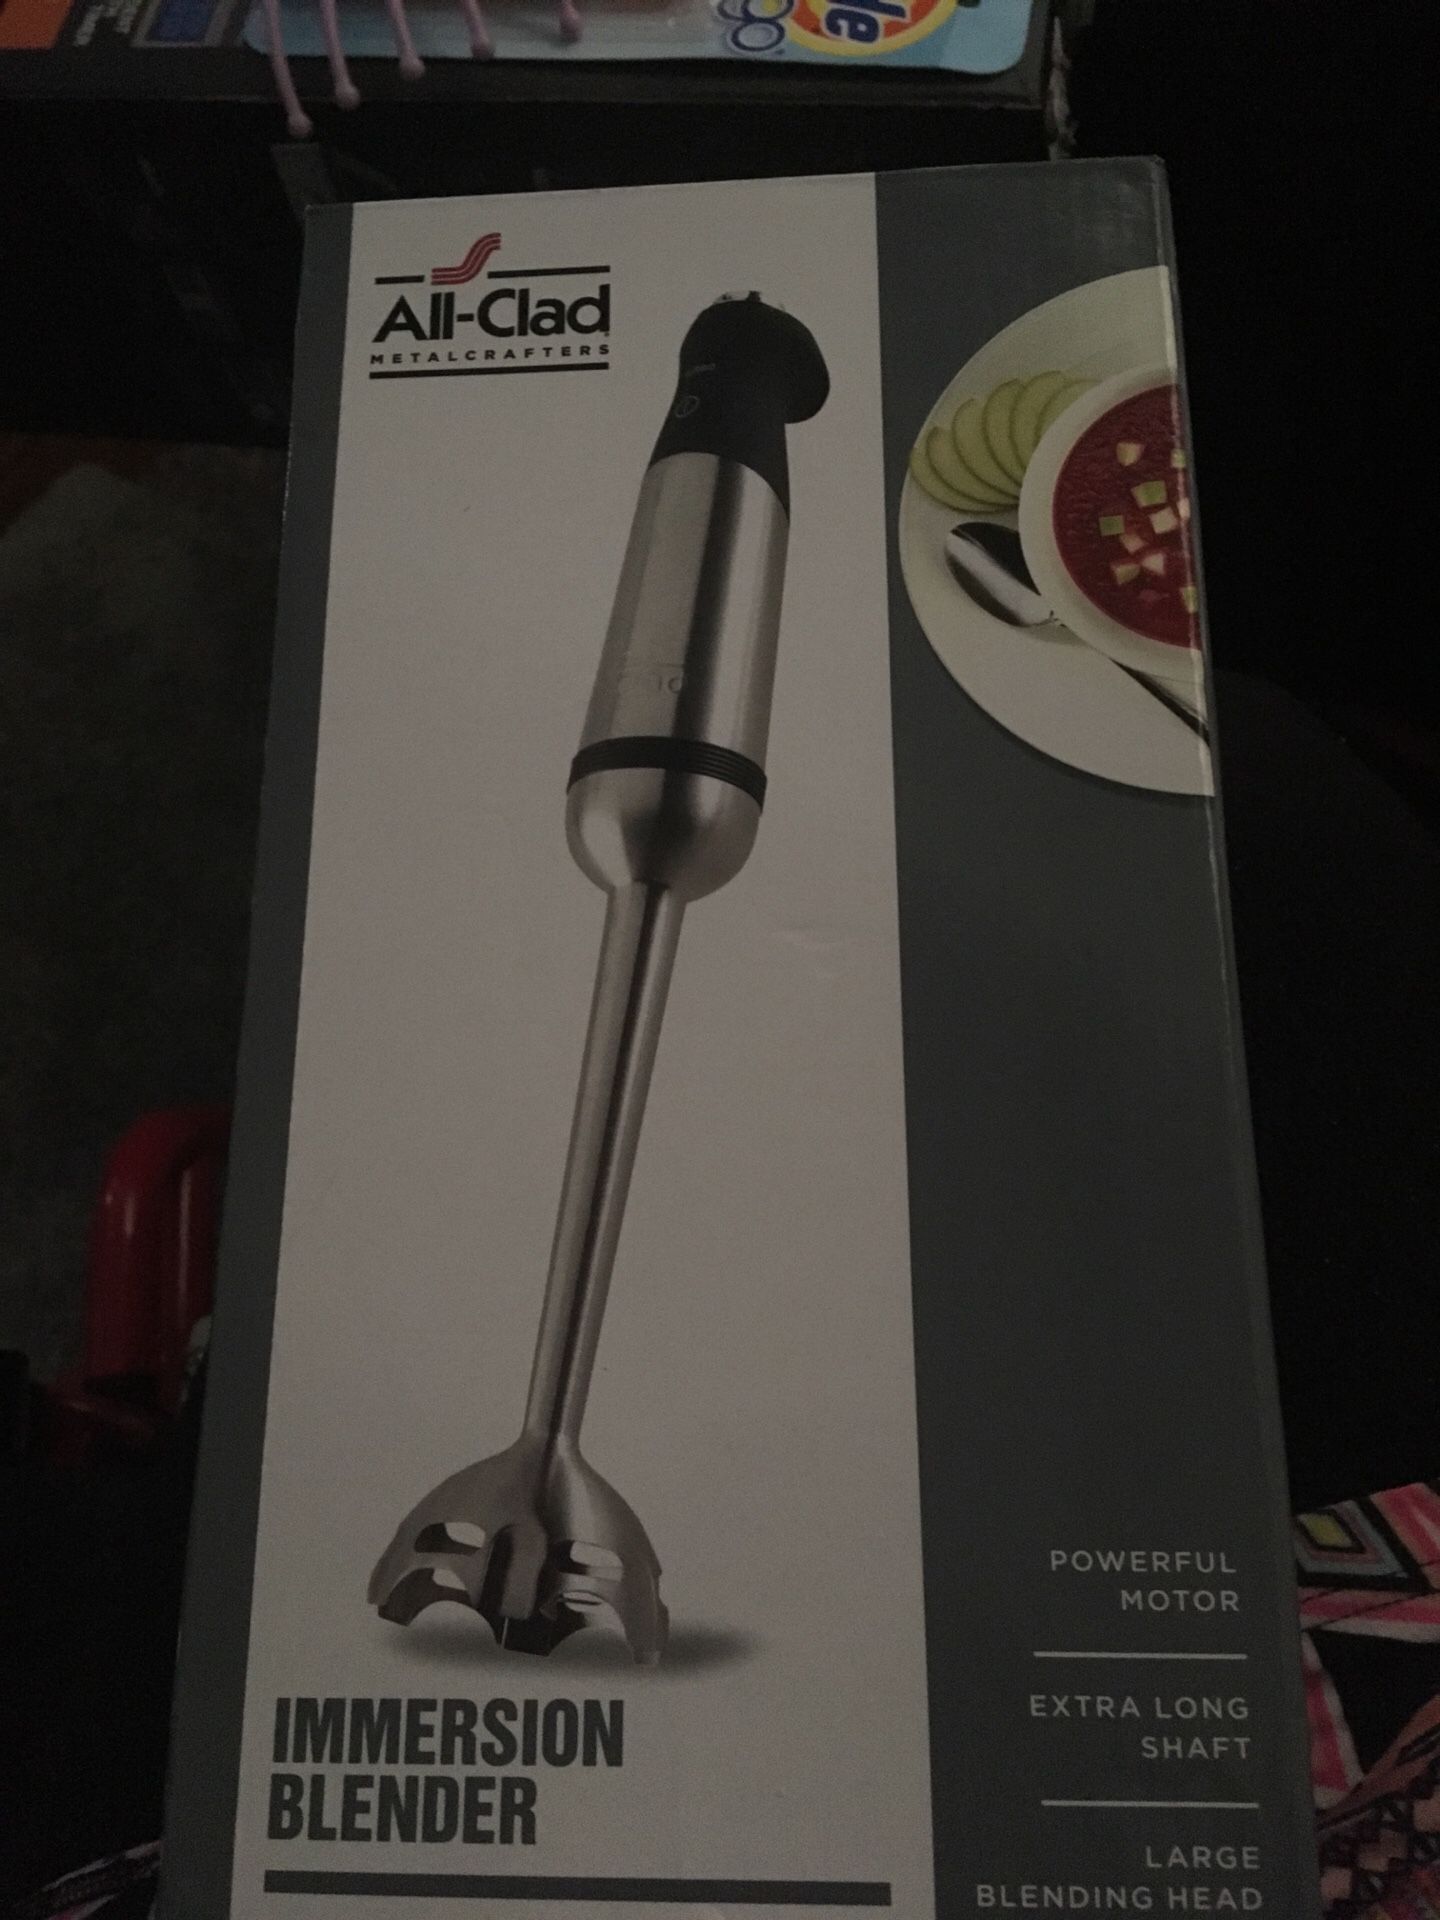 New All-Clad immersion blender new